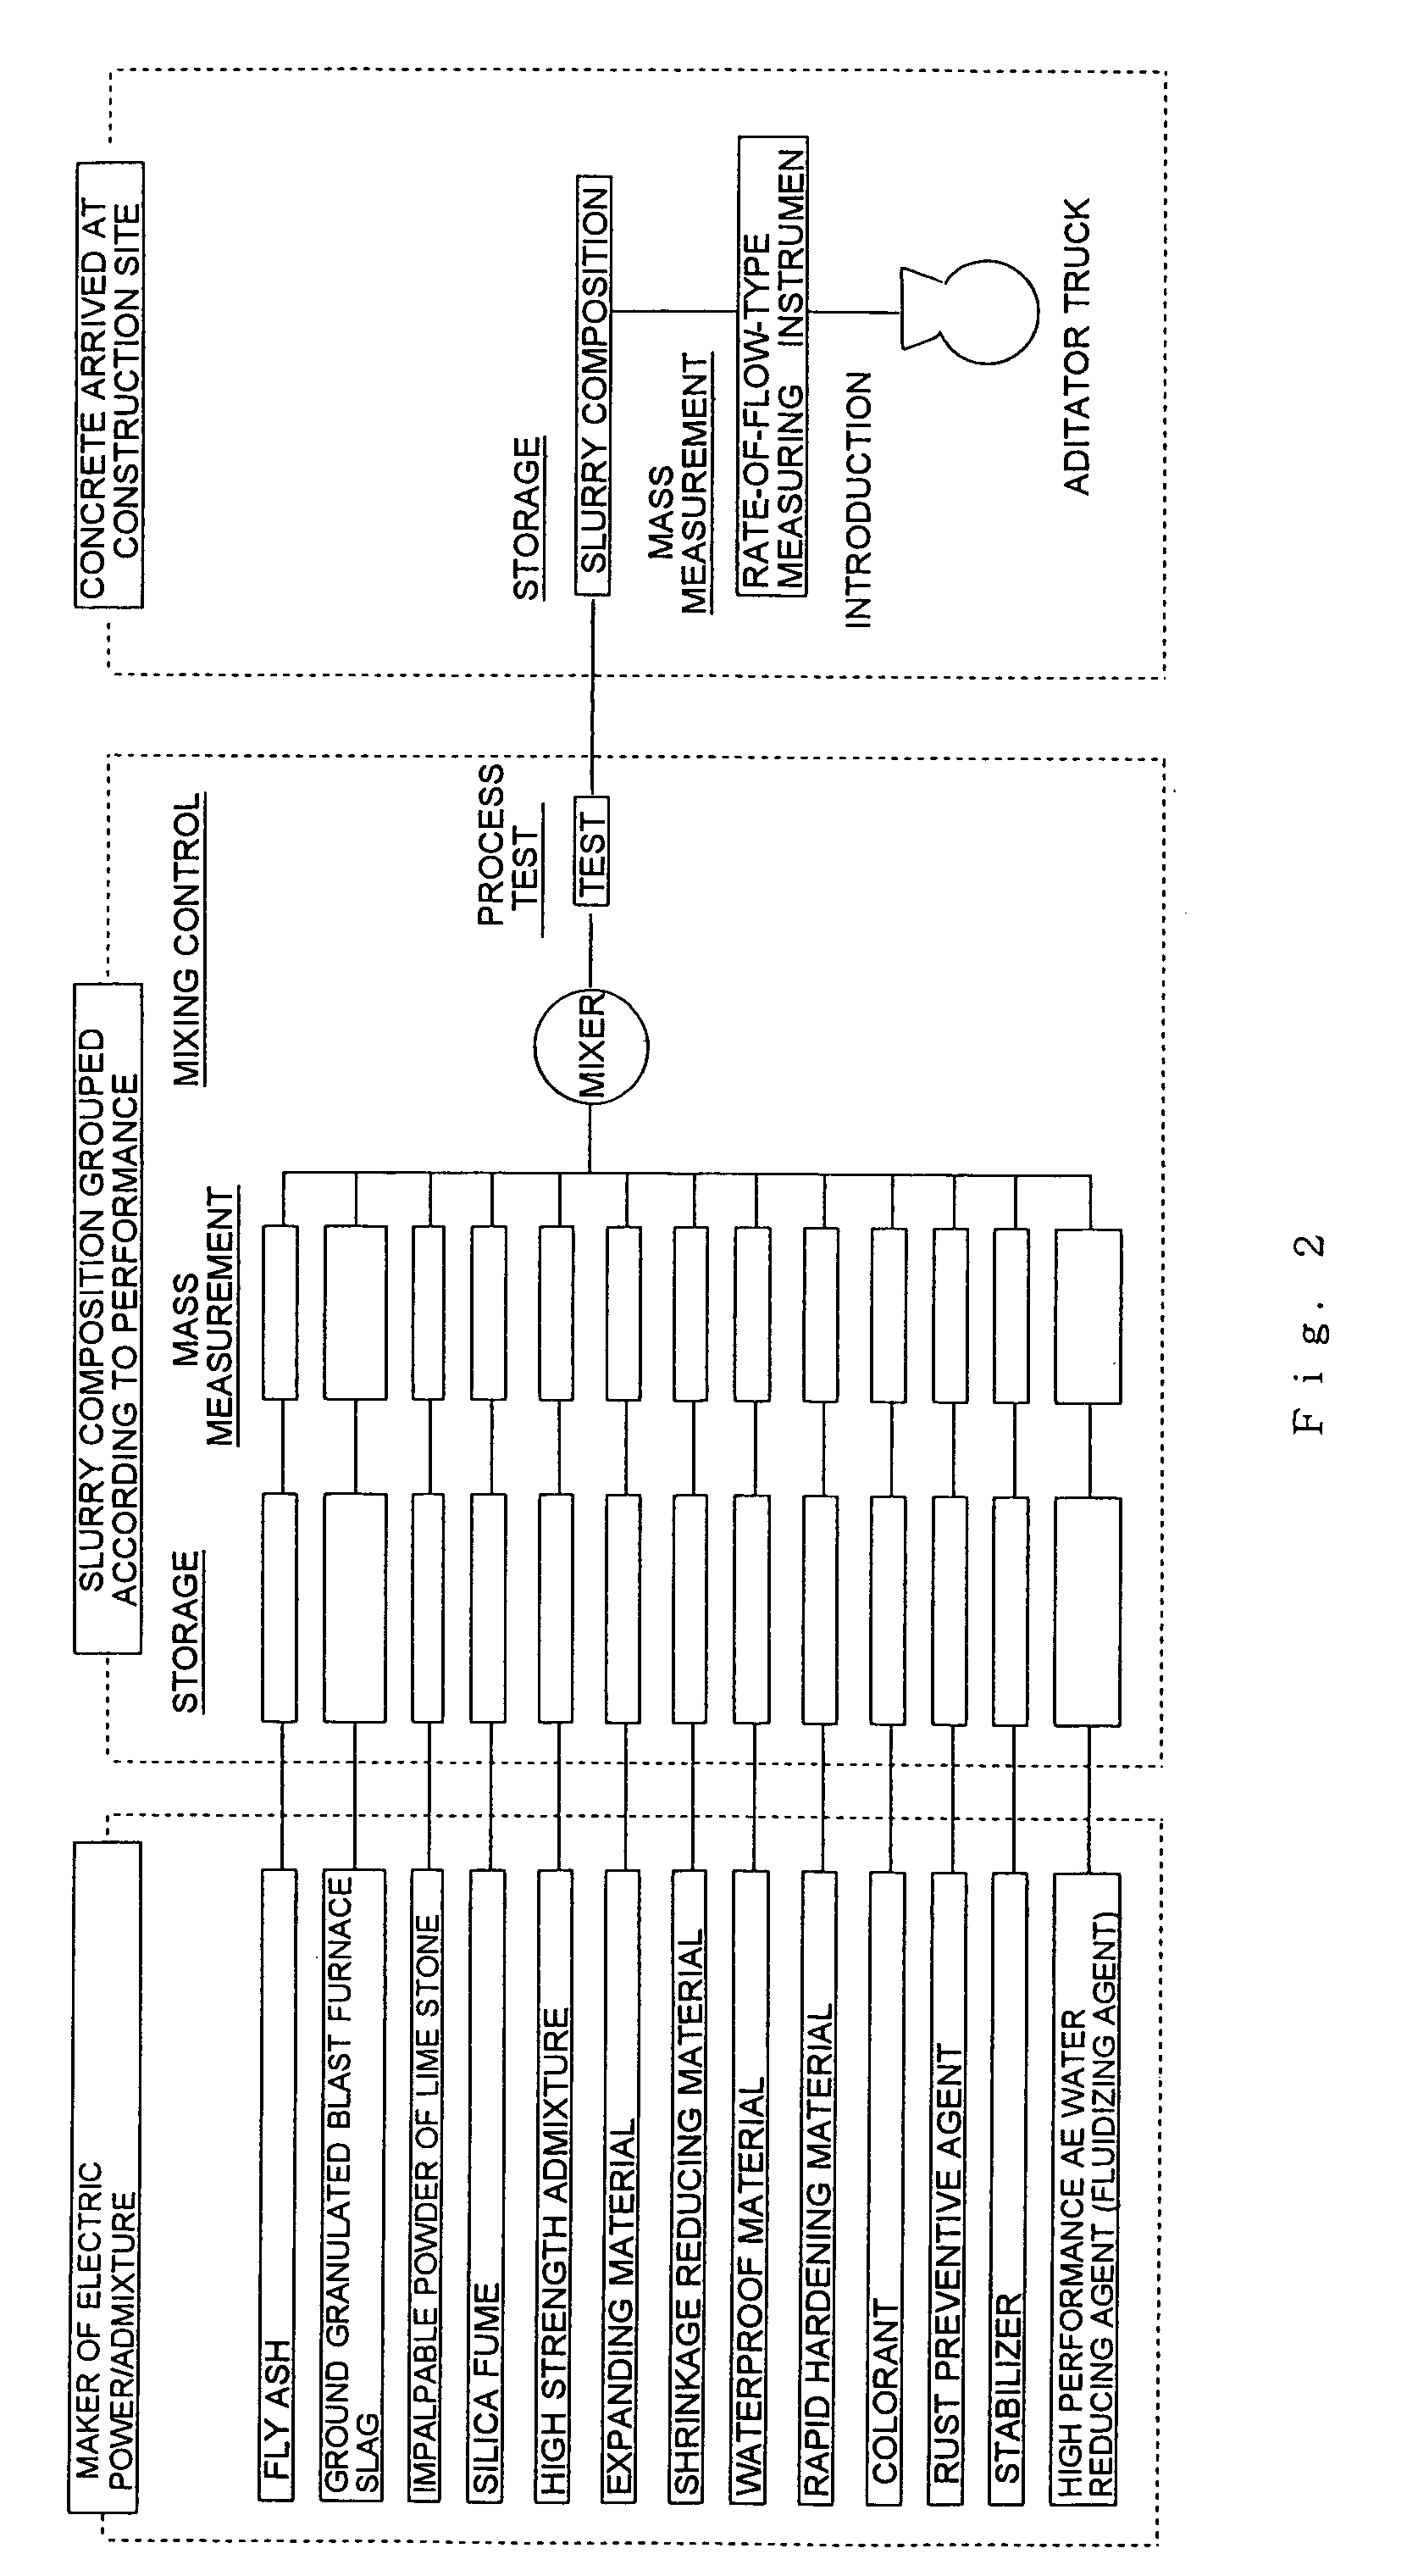 Method for producing concrete and standardizing system for concrete production